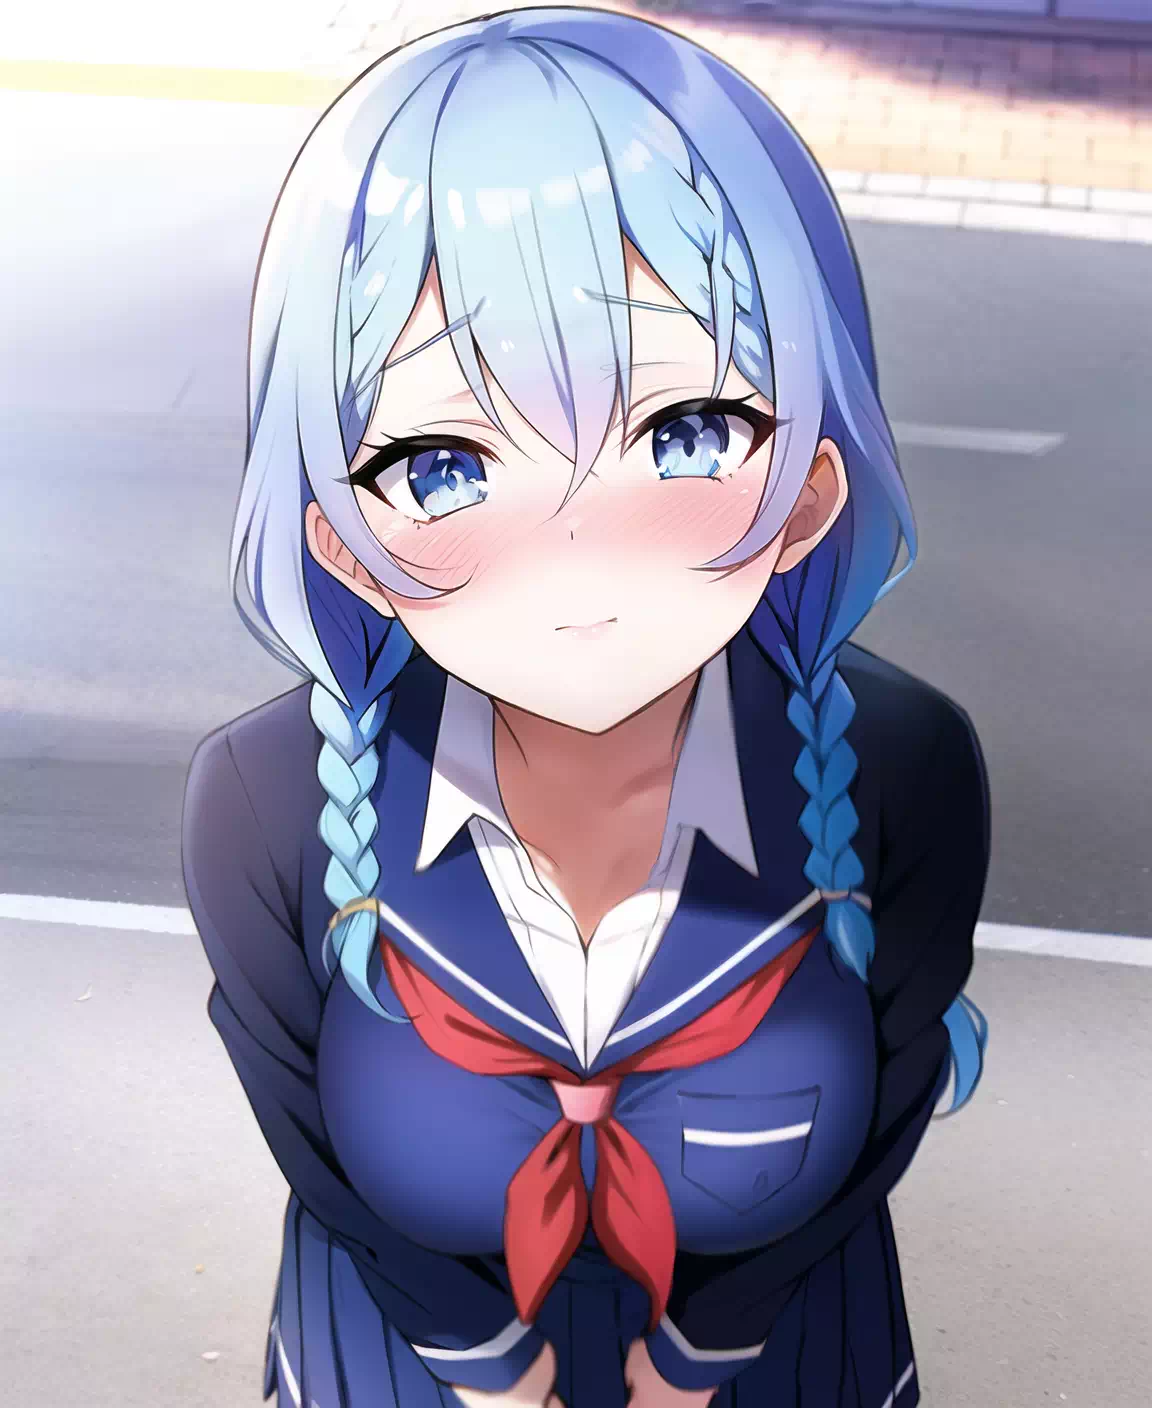 Waiting for a headpat